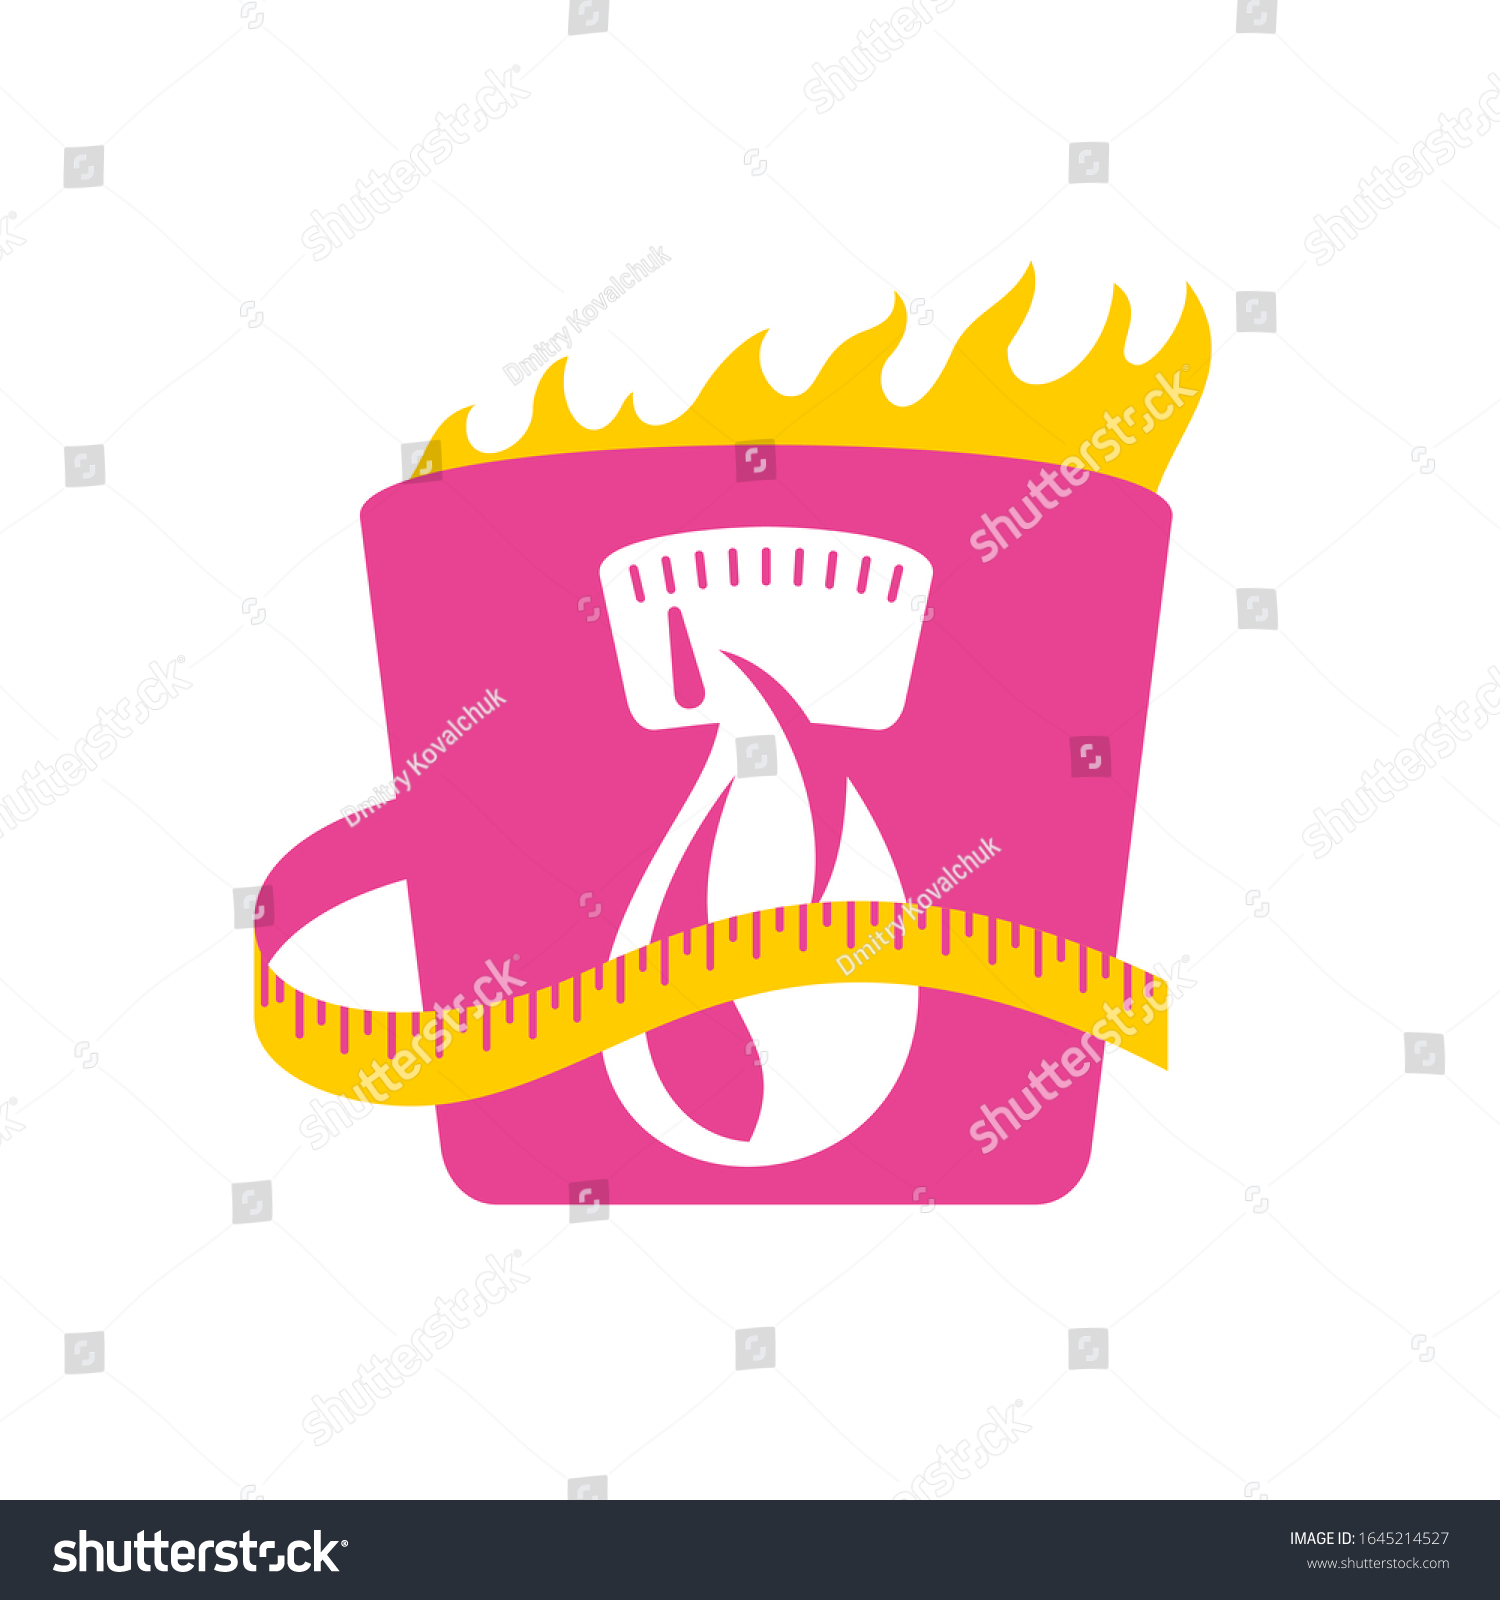 SVG of kcal icon (calories burning sign) combination of flame (fats), weight scales and measurement tape - isolated vector emblem for healthy food, fitness or diet program  svg